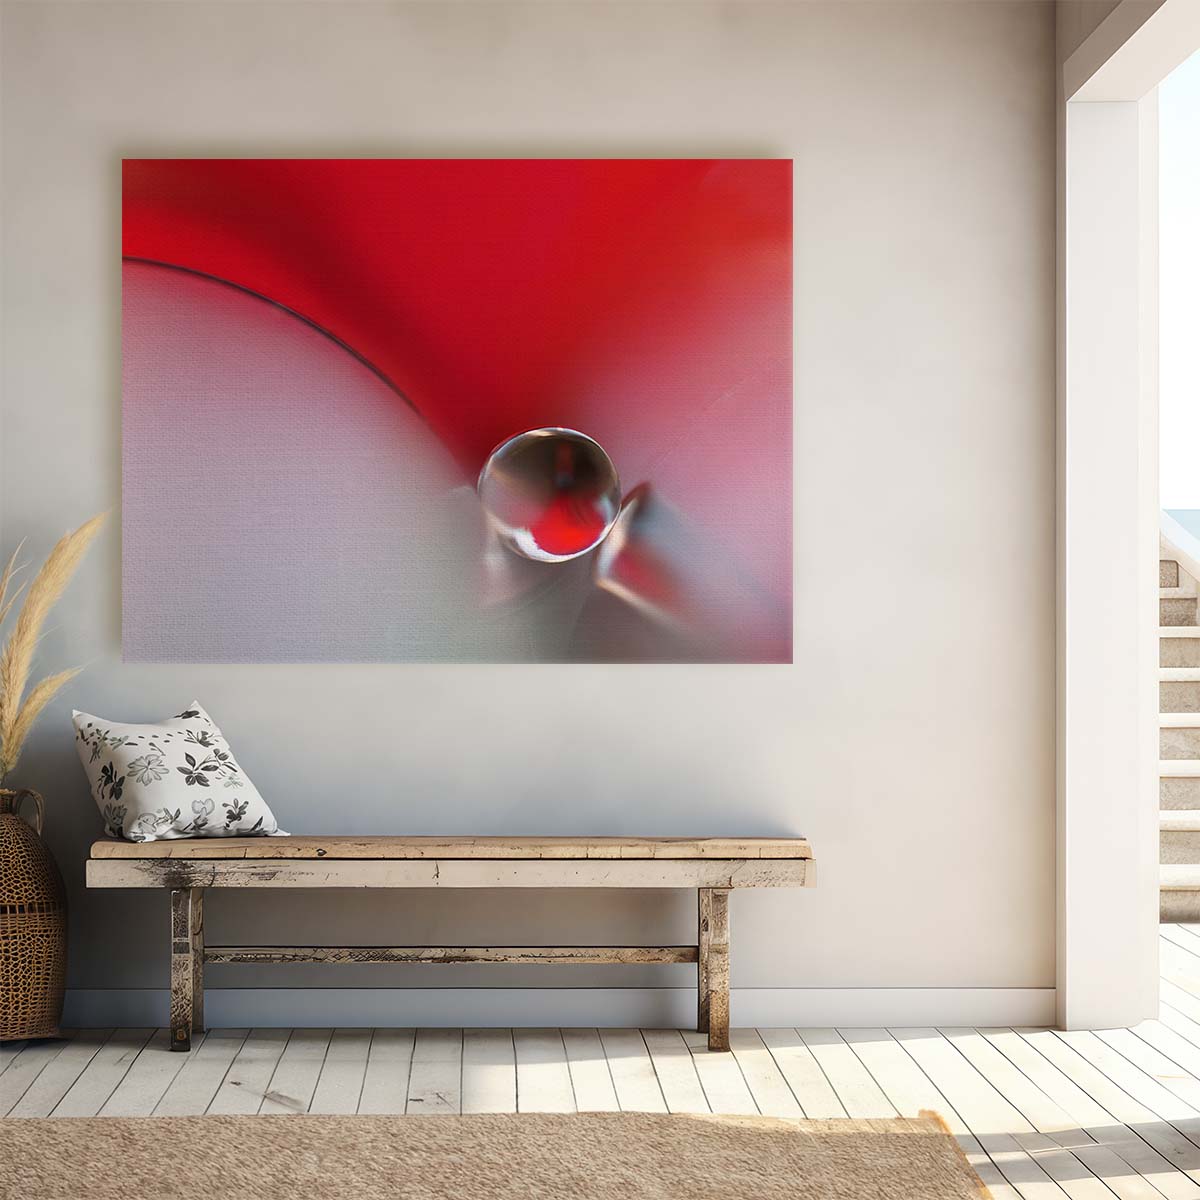 Red Pearl Droplet Macro Abstraction Wall Art by Luxuriance Designs. Made in USA.